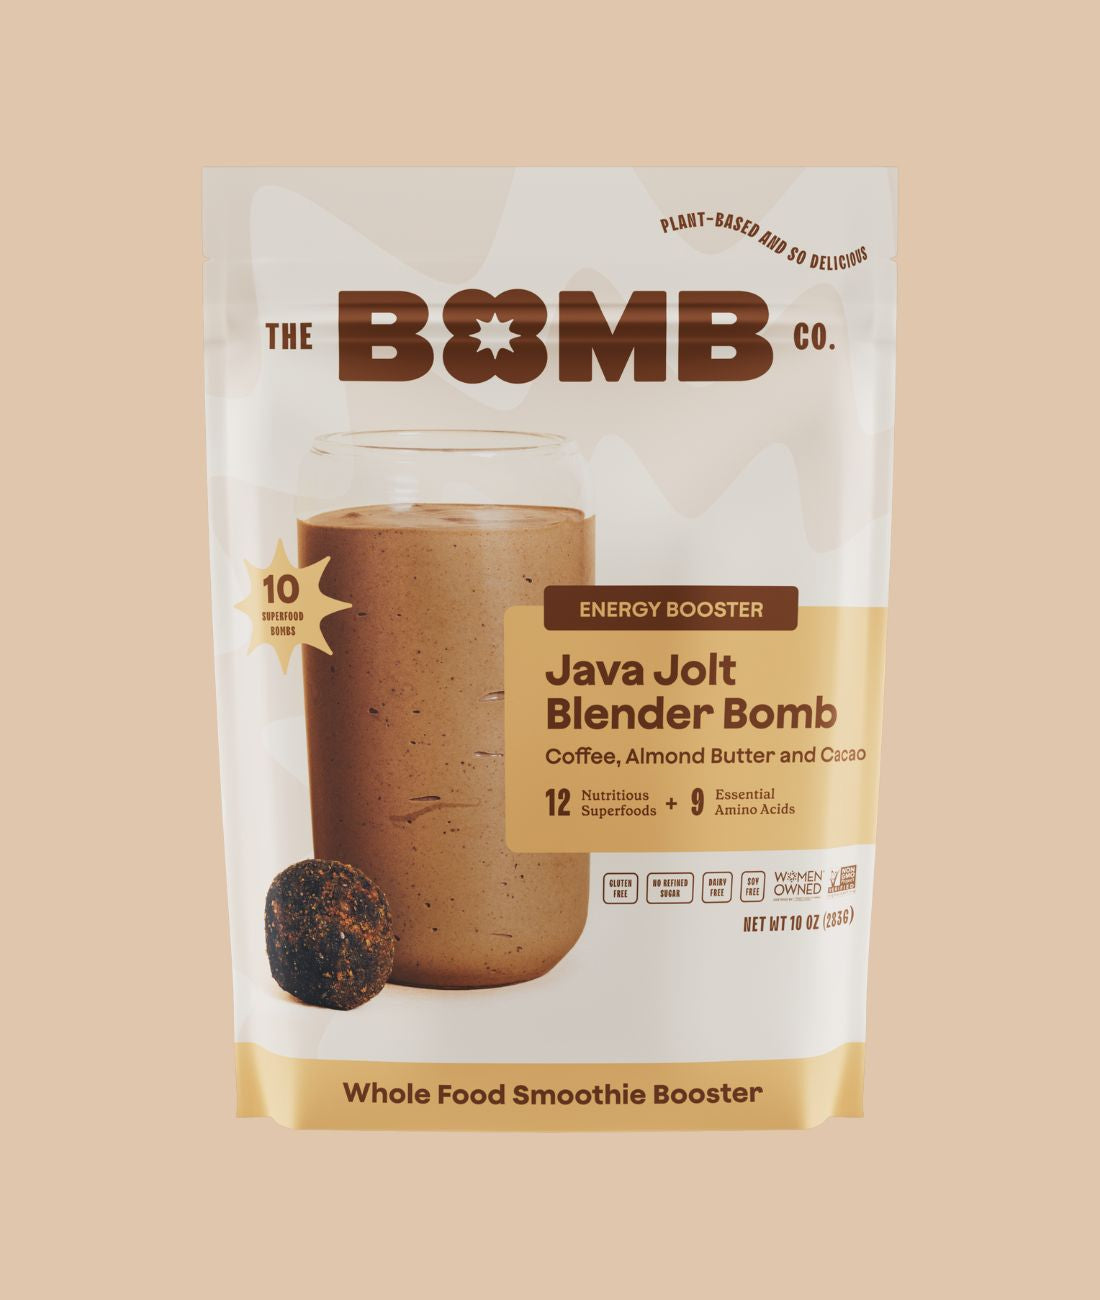 blender bombs provides the perfect ratio of fiber, fat, and protein. no bs,  just whole food and plant-based ingredients.